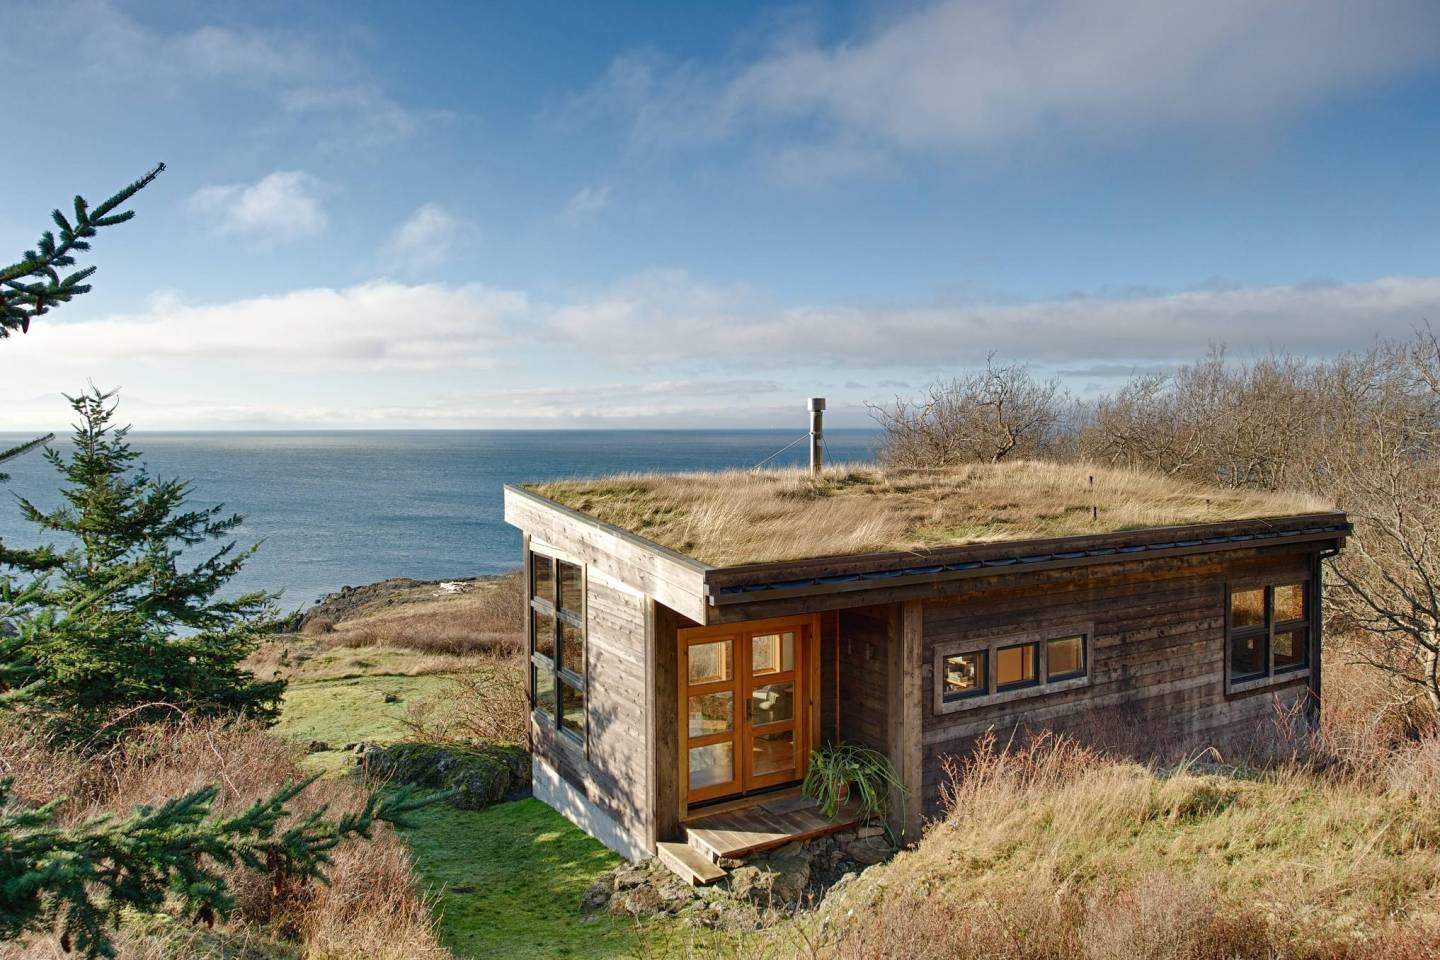 Holiday Ideas for Your San Juan Island Cabin Rental